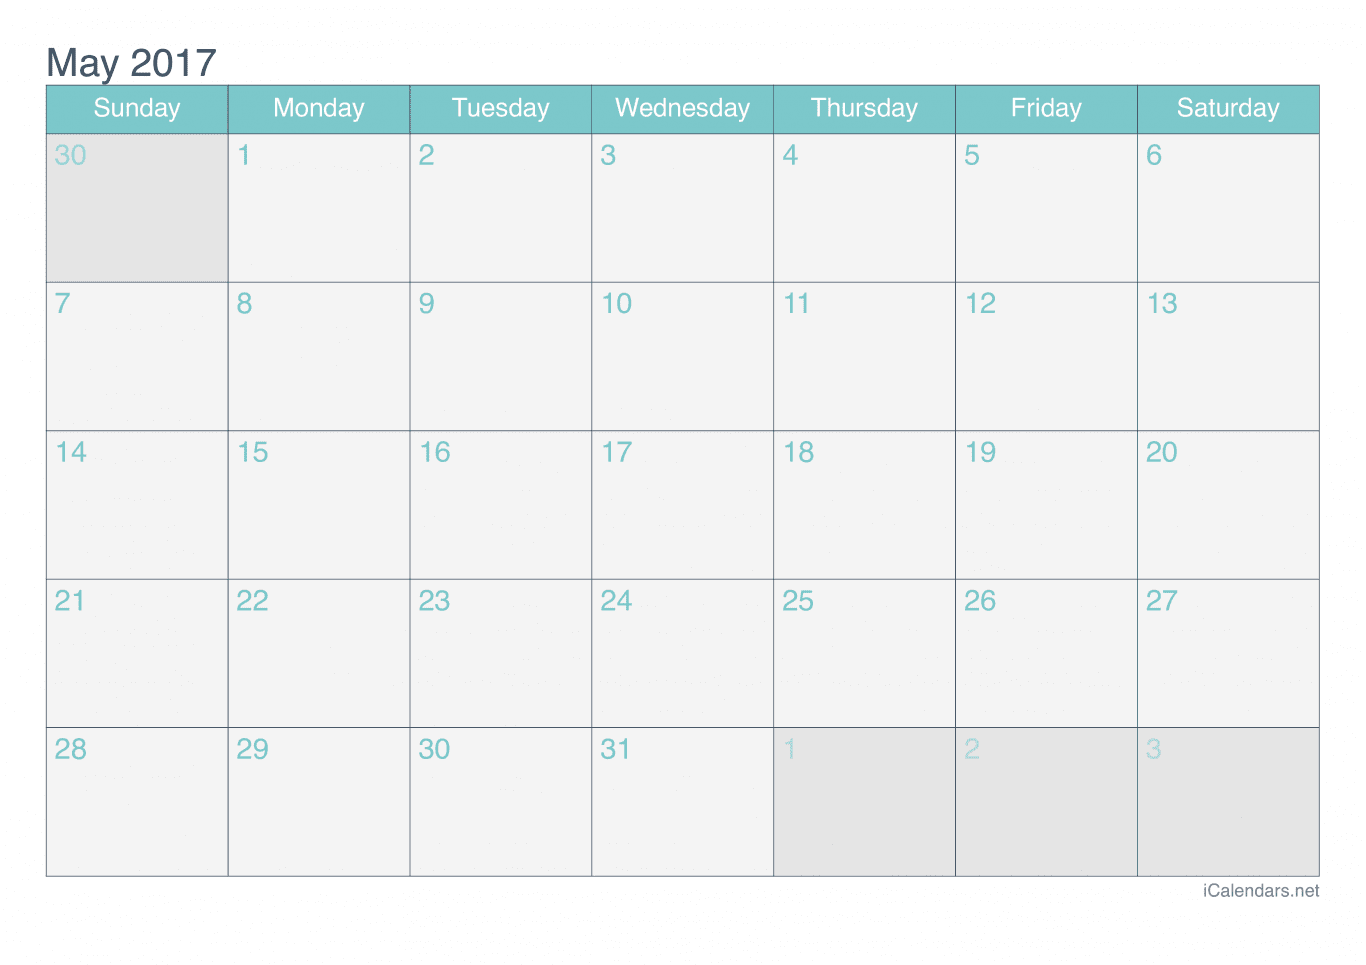 2017 May Calendar - Turquoise